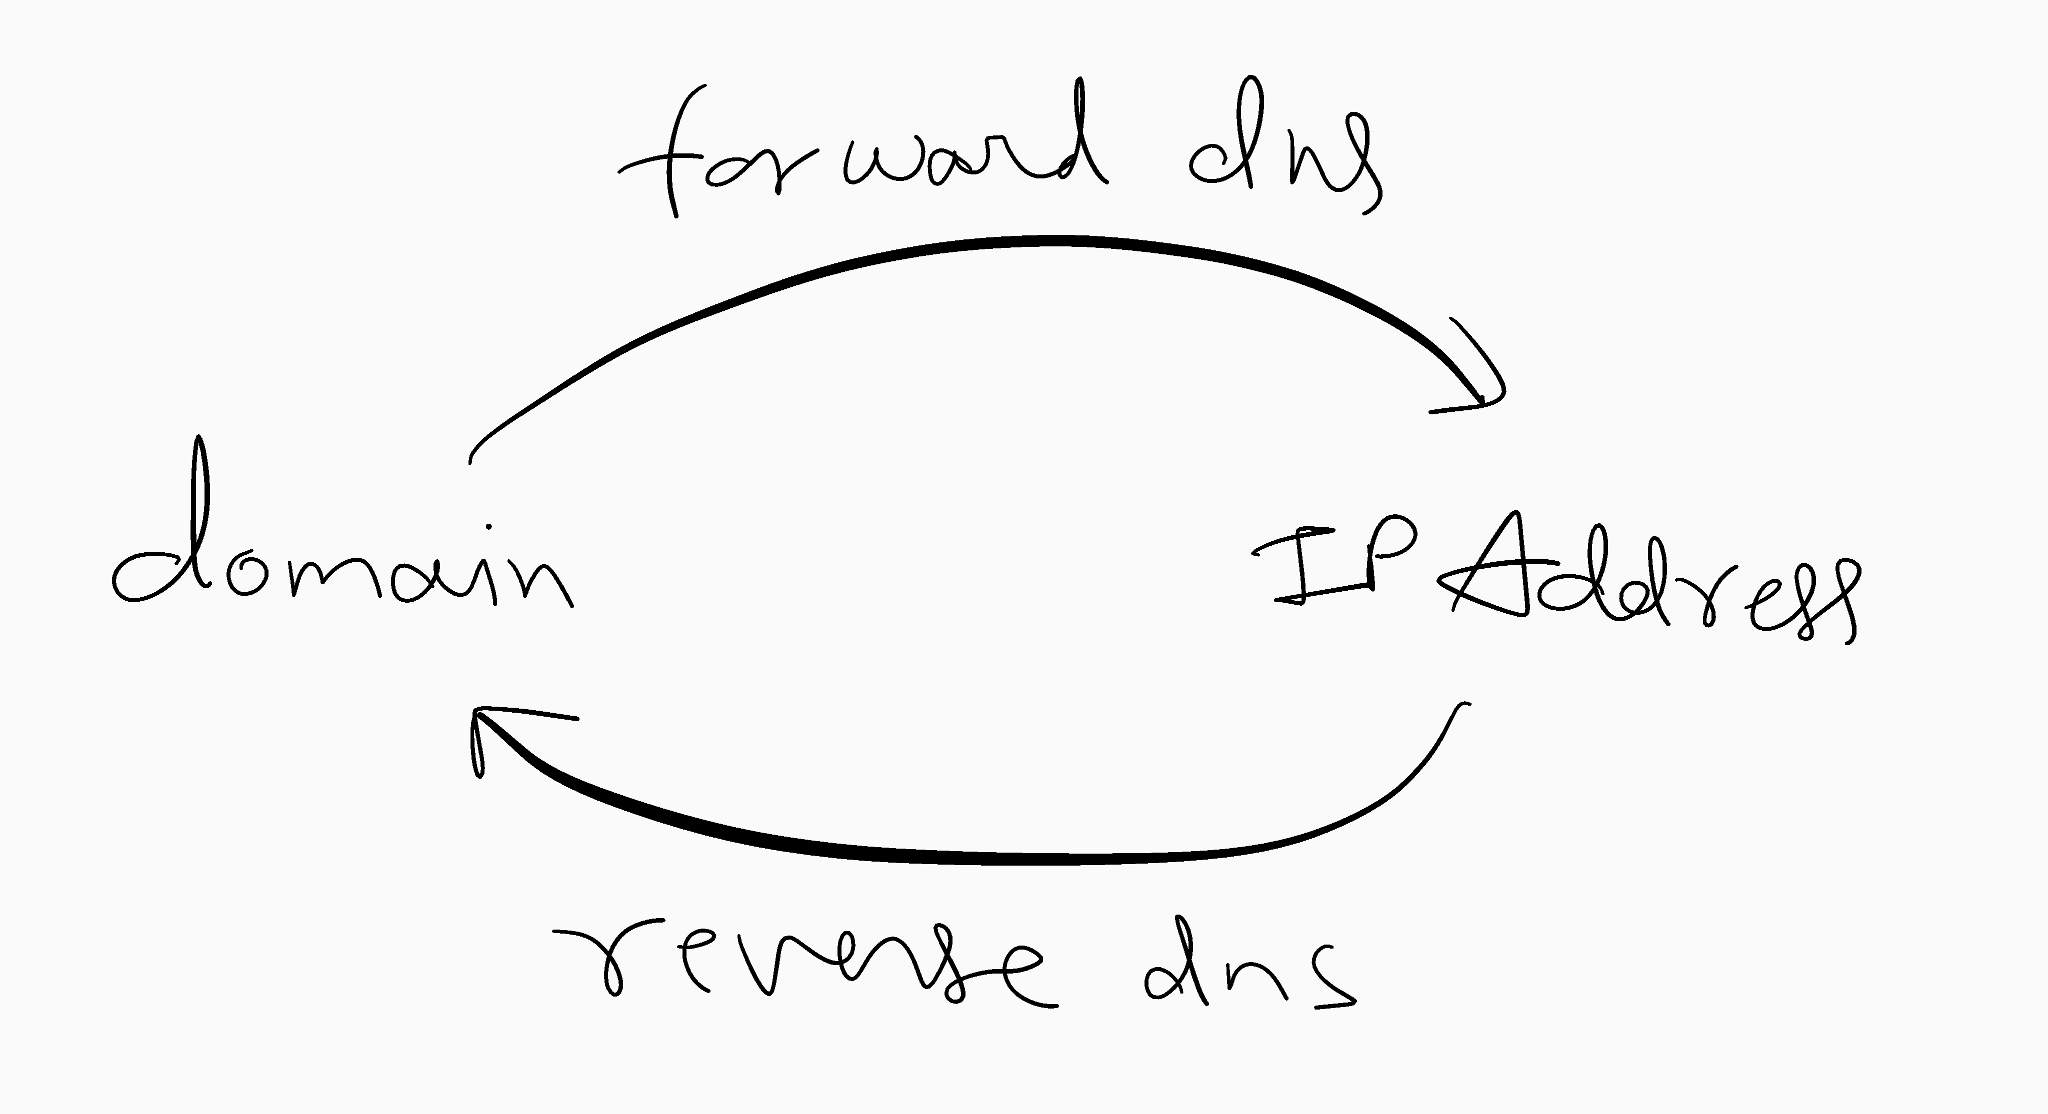 Representation of Forward and Reverse DNS